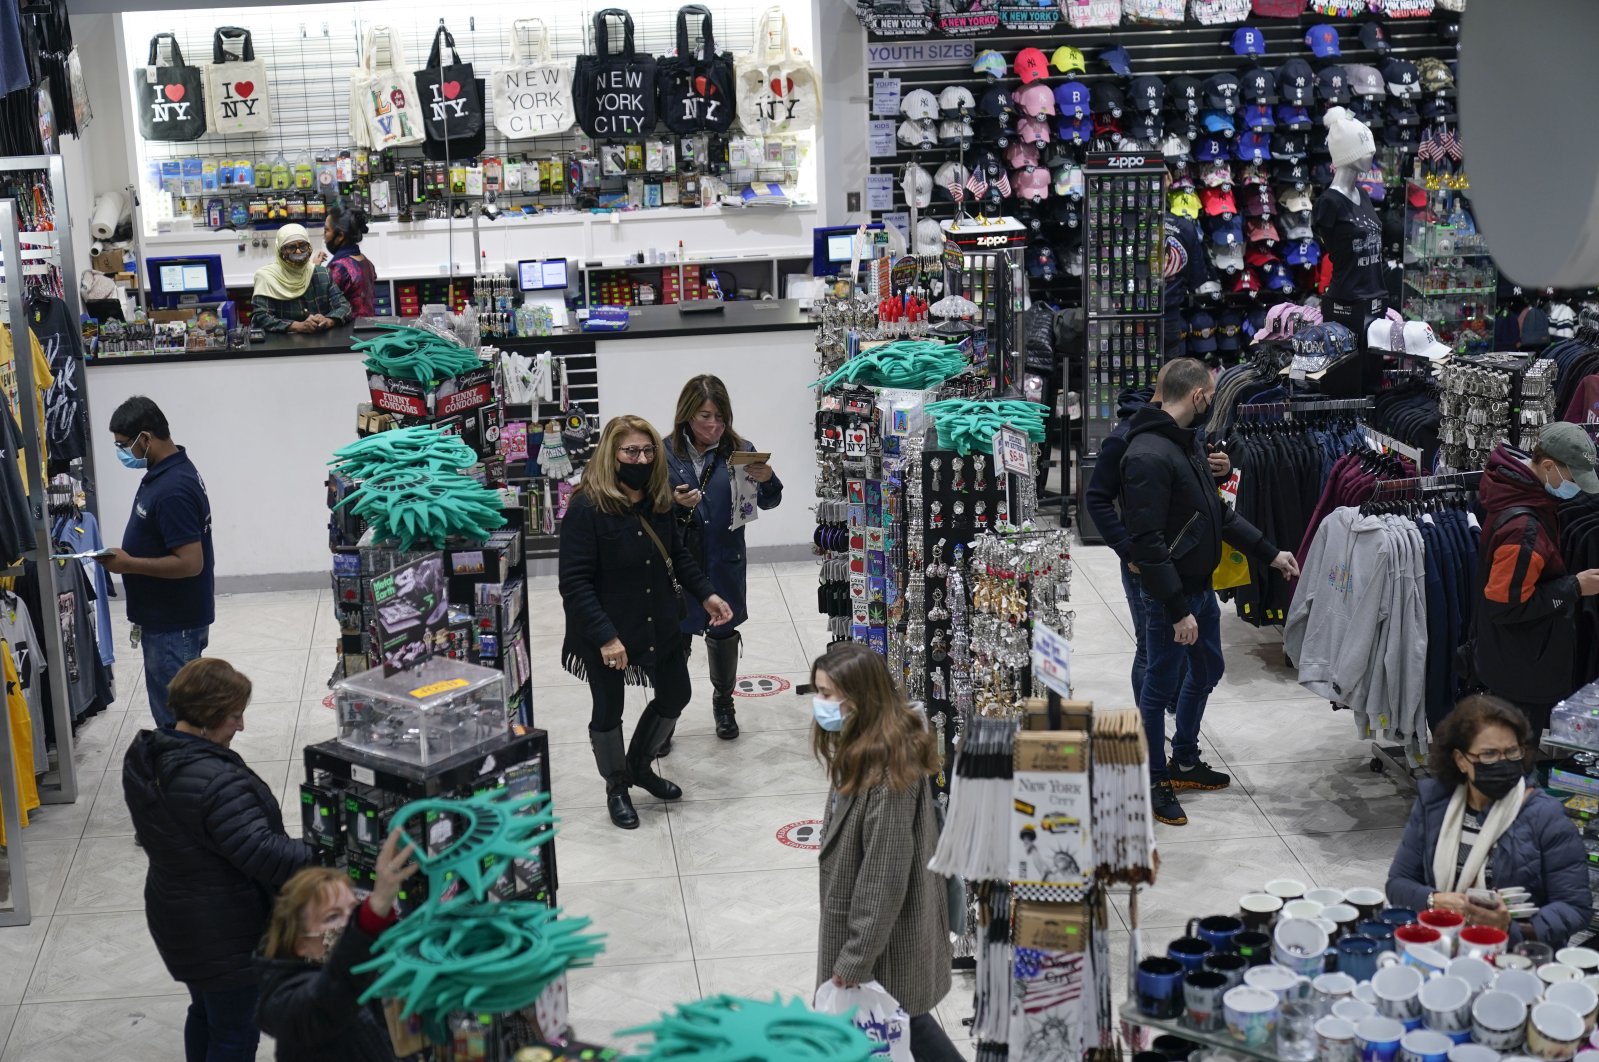 People shop at a souvenir and sports apparel store in Times Square in New York, U.S., Nov. 15, 2021. (AP Photo)